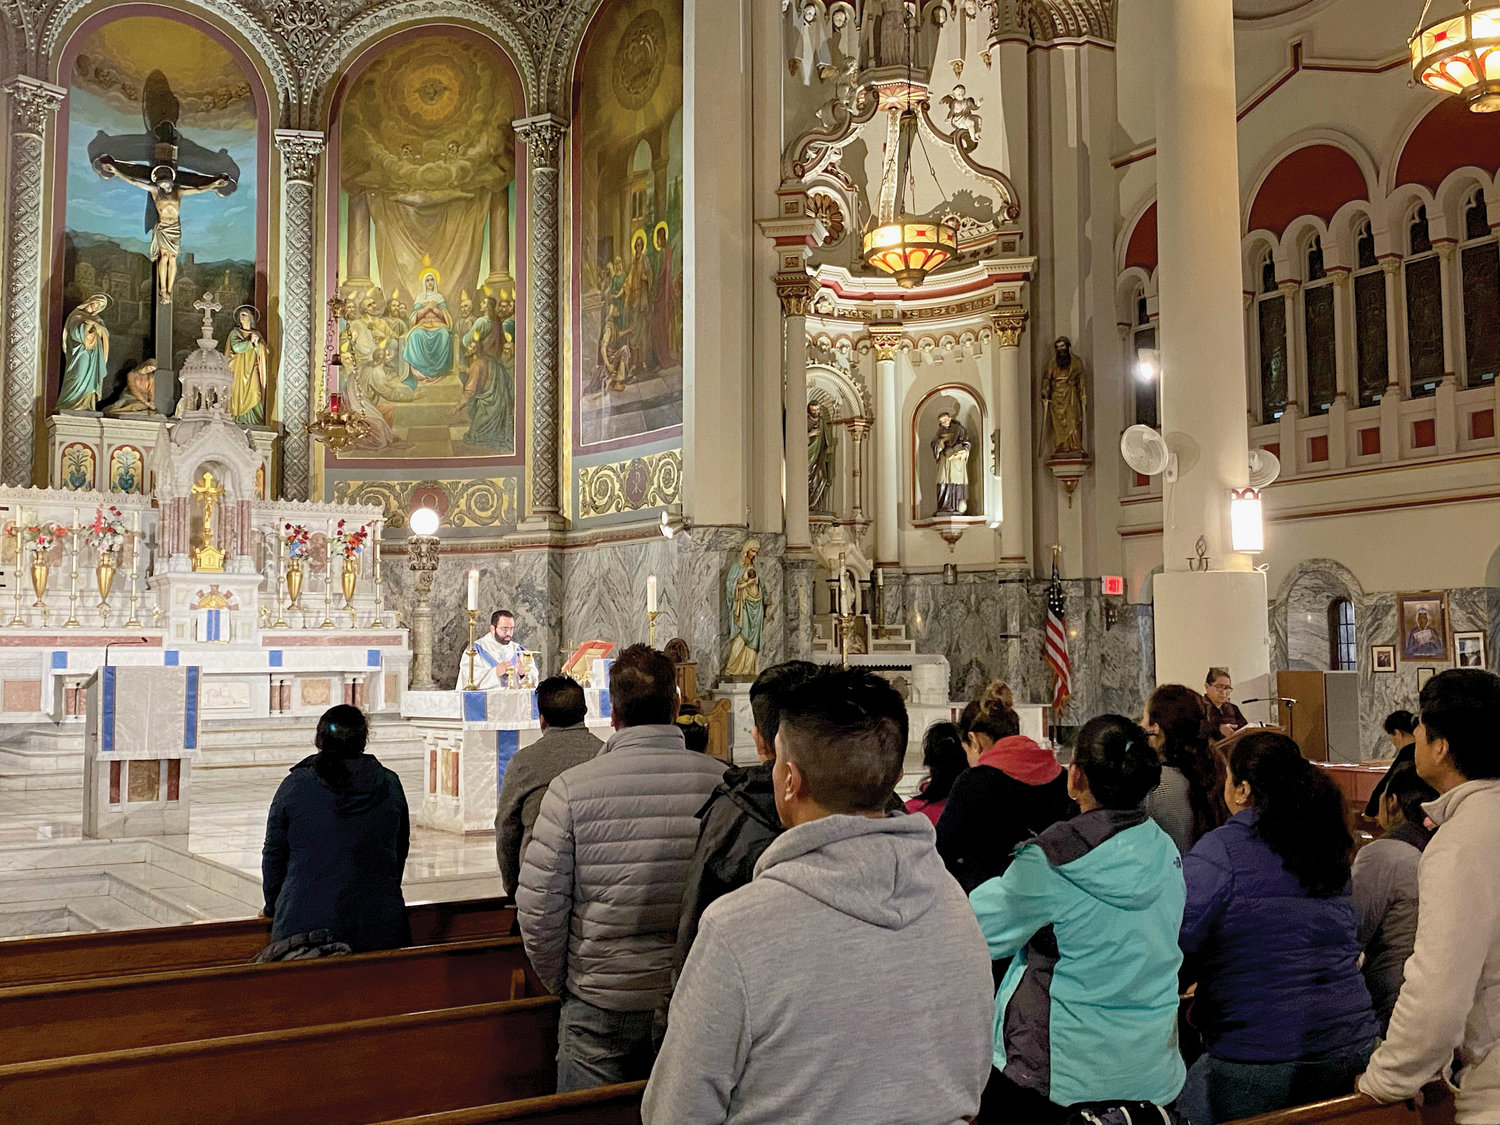 Father Rivera celebrates a votive Mass of Our Mother of Perpetual Help for the pilgrims after their journey.